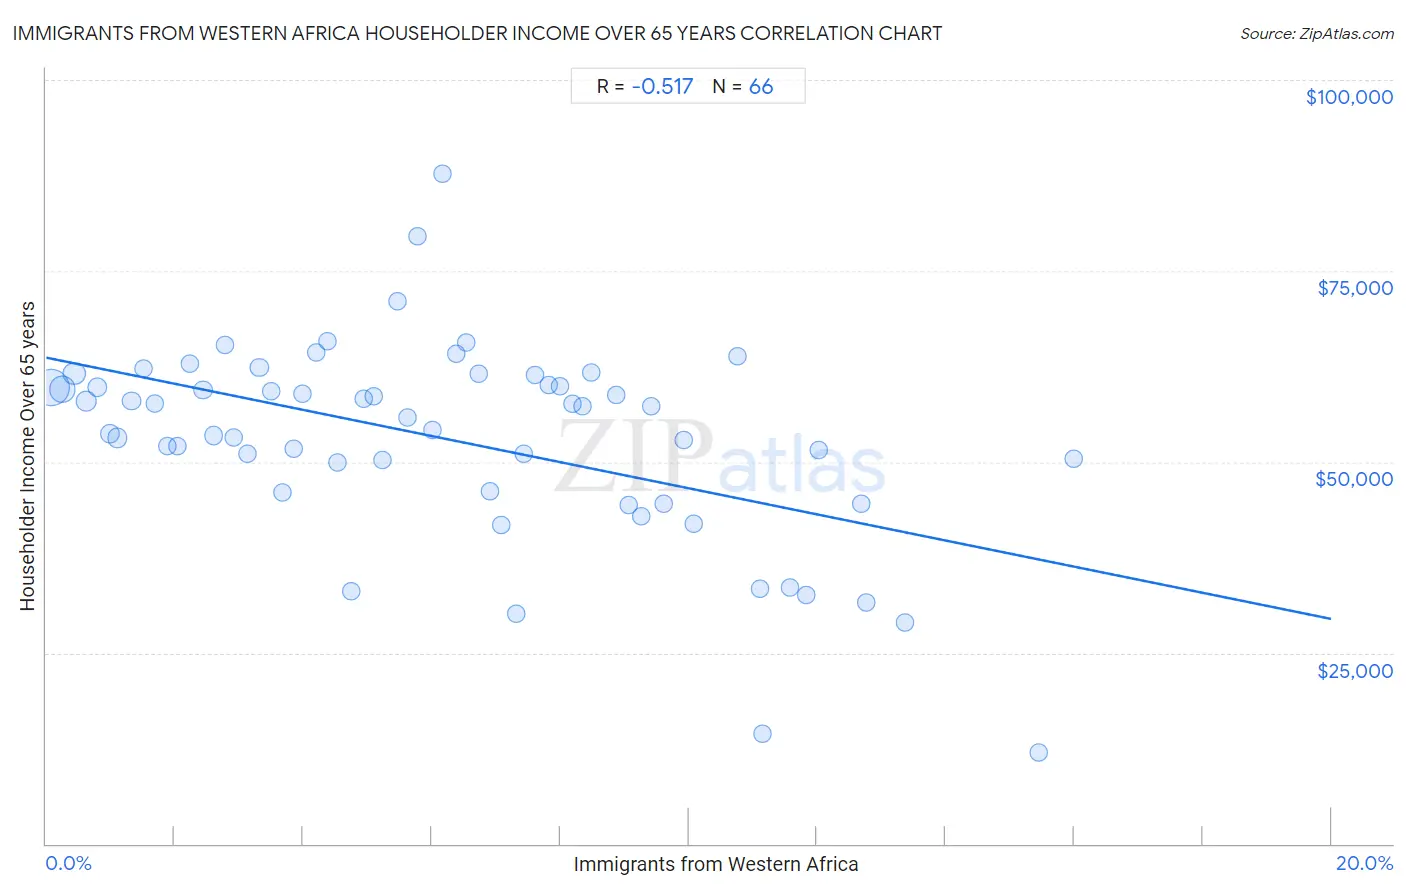 Immigrants from Western Africa Householder Income Over 65 years